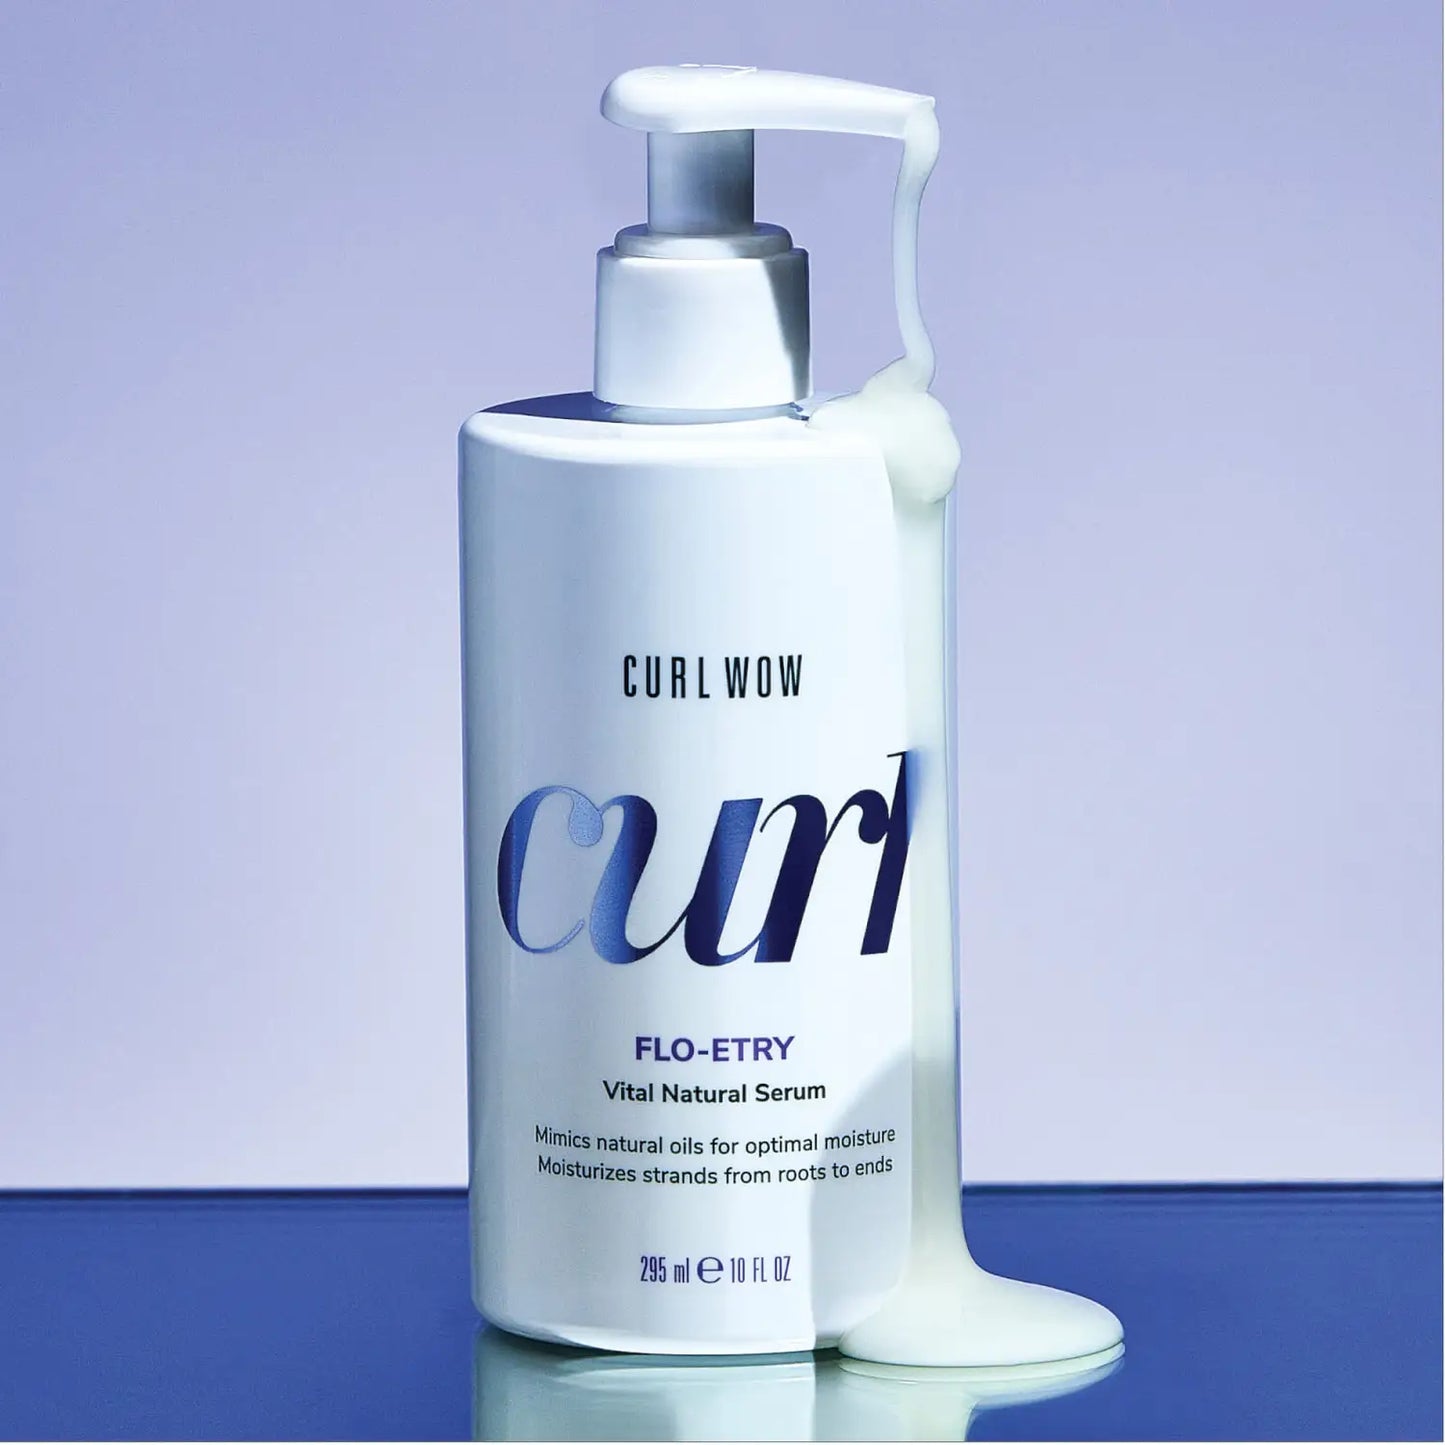 COLOR WOW | CURL WOW FLO-ETRY VITAL NATURAL SUPPLEMENT